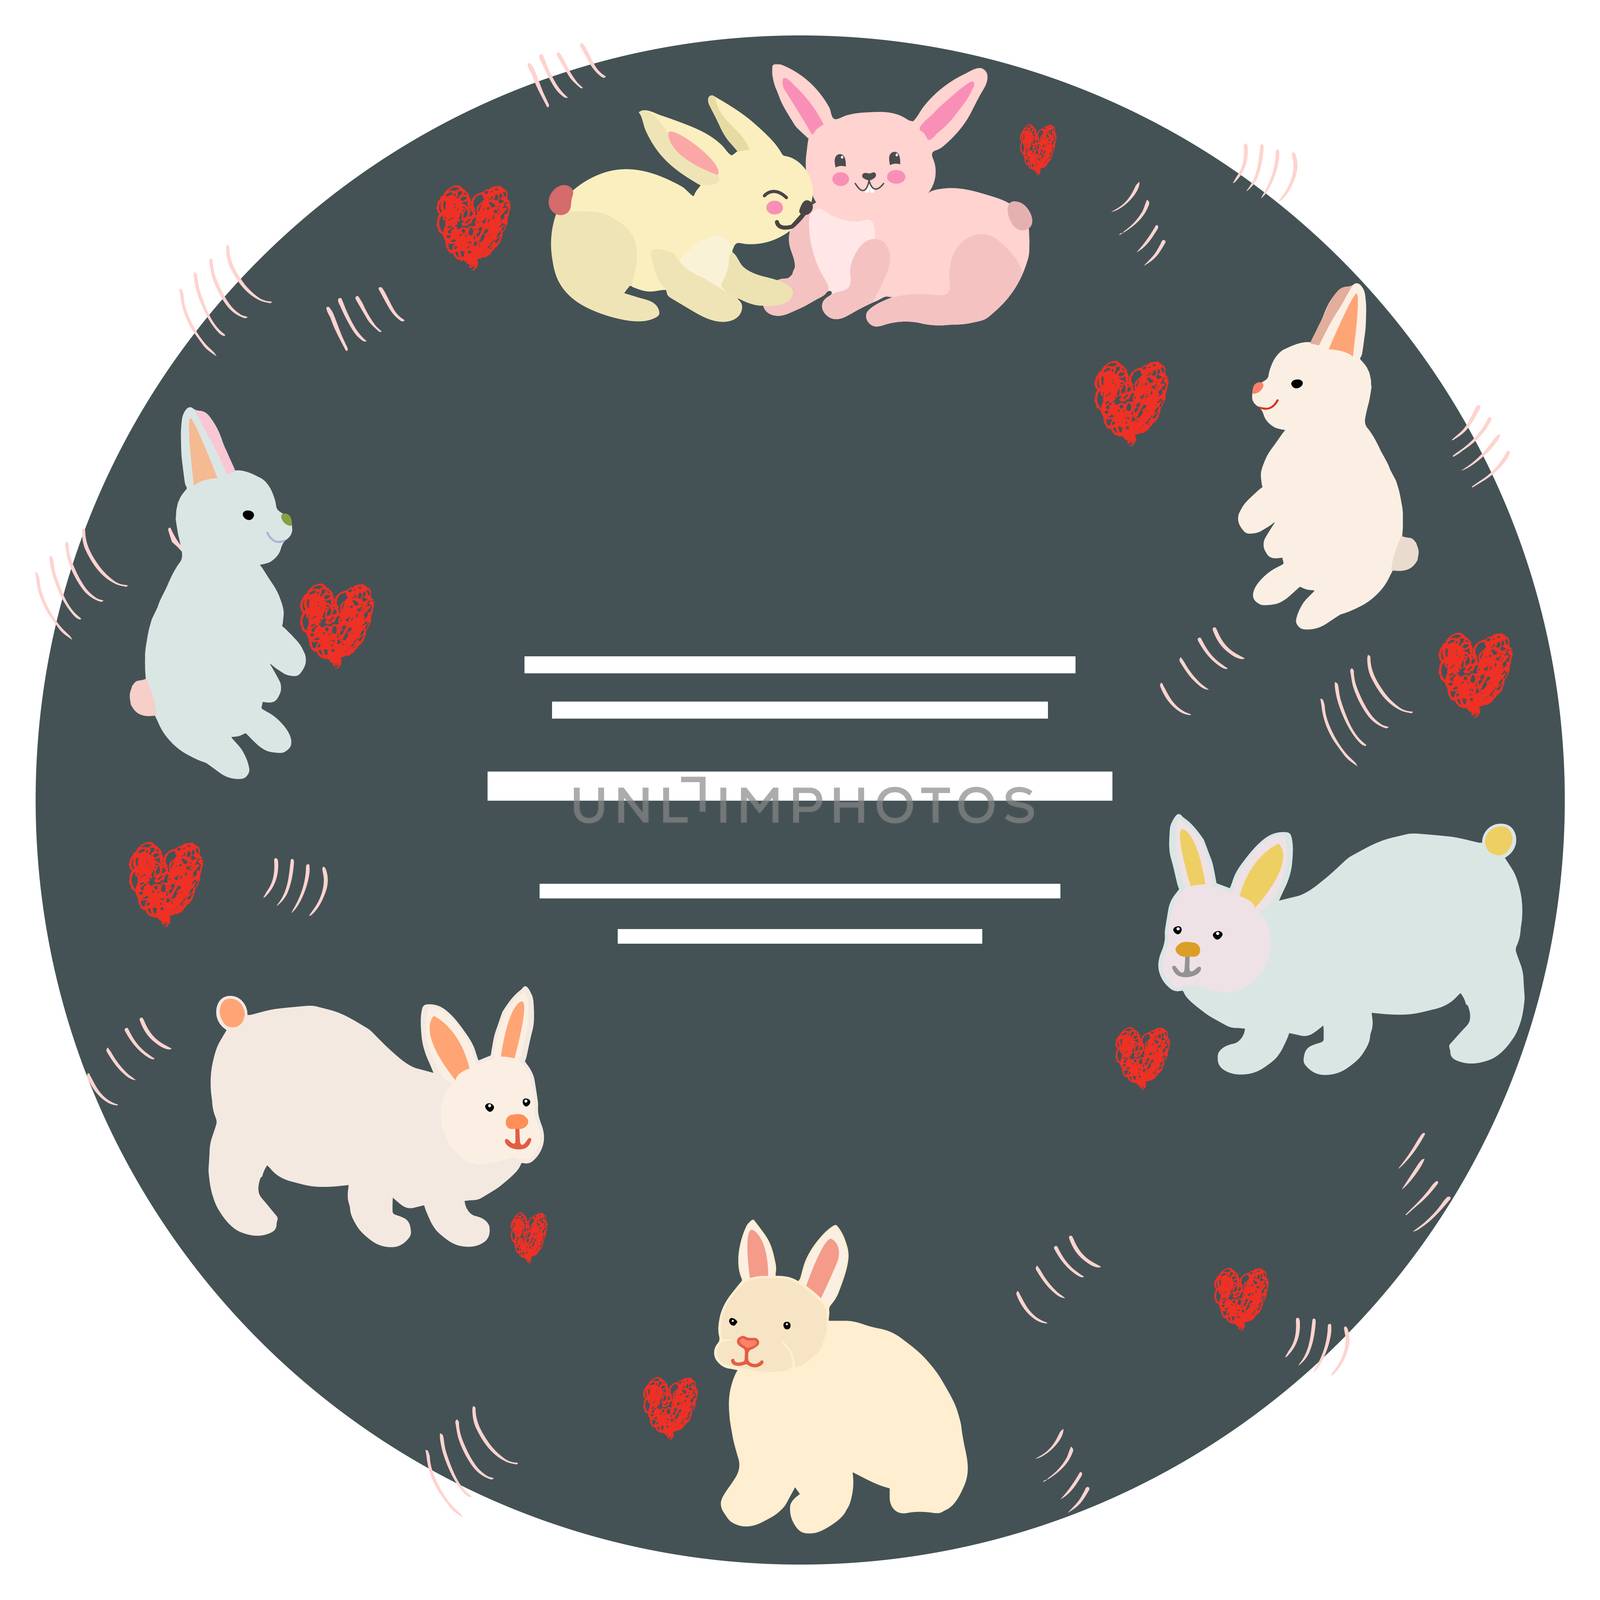 Round shape with cute easter bunnies, red hearts and space for your text. Black circle on white background. Poster vector design.